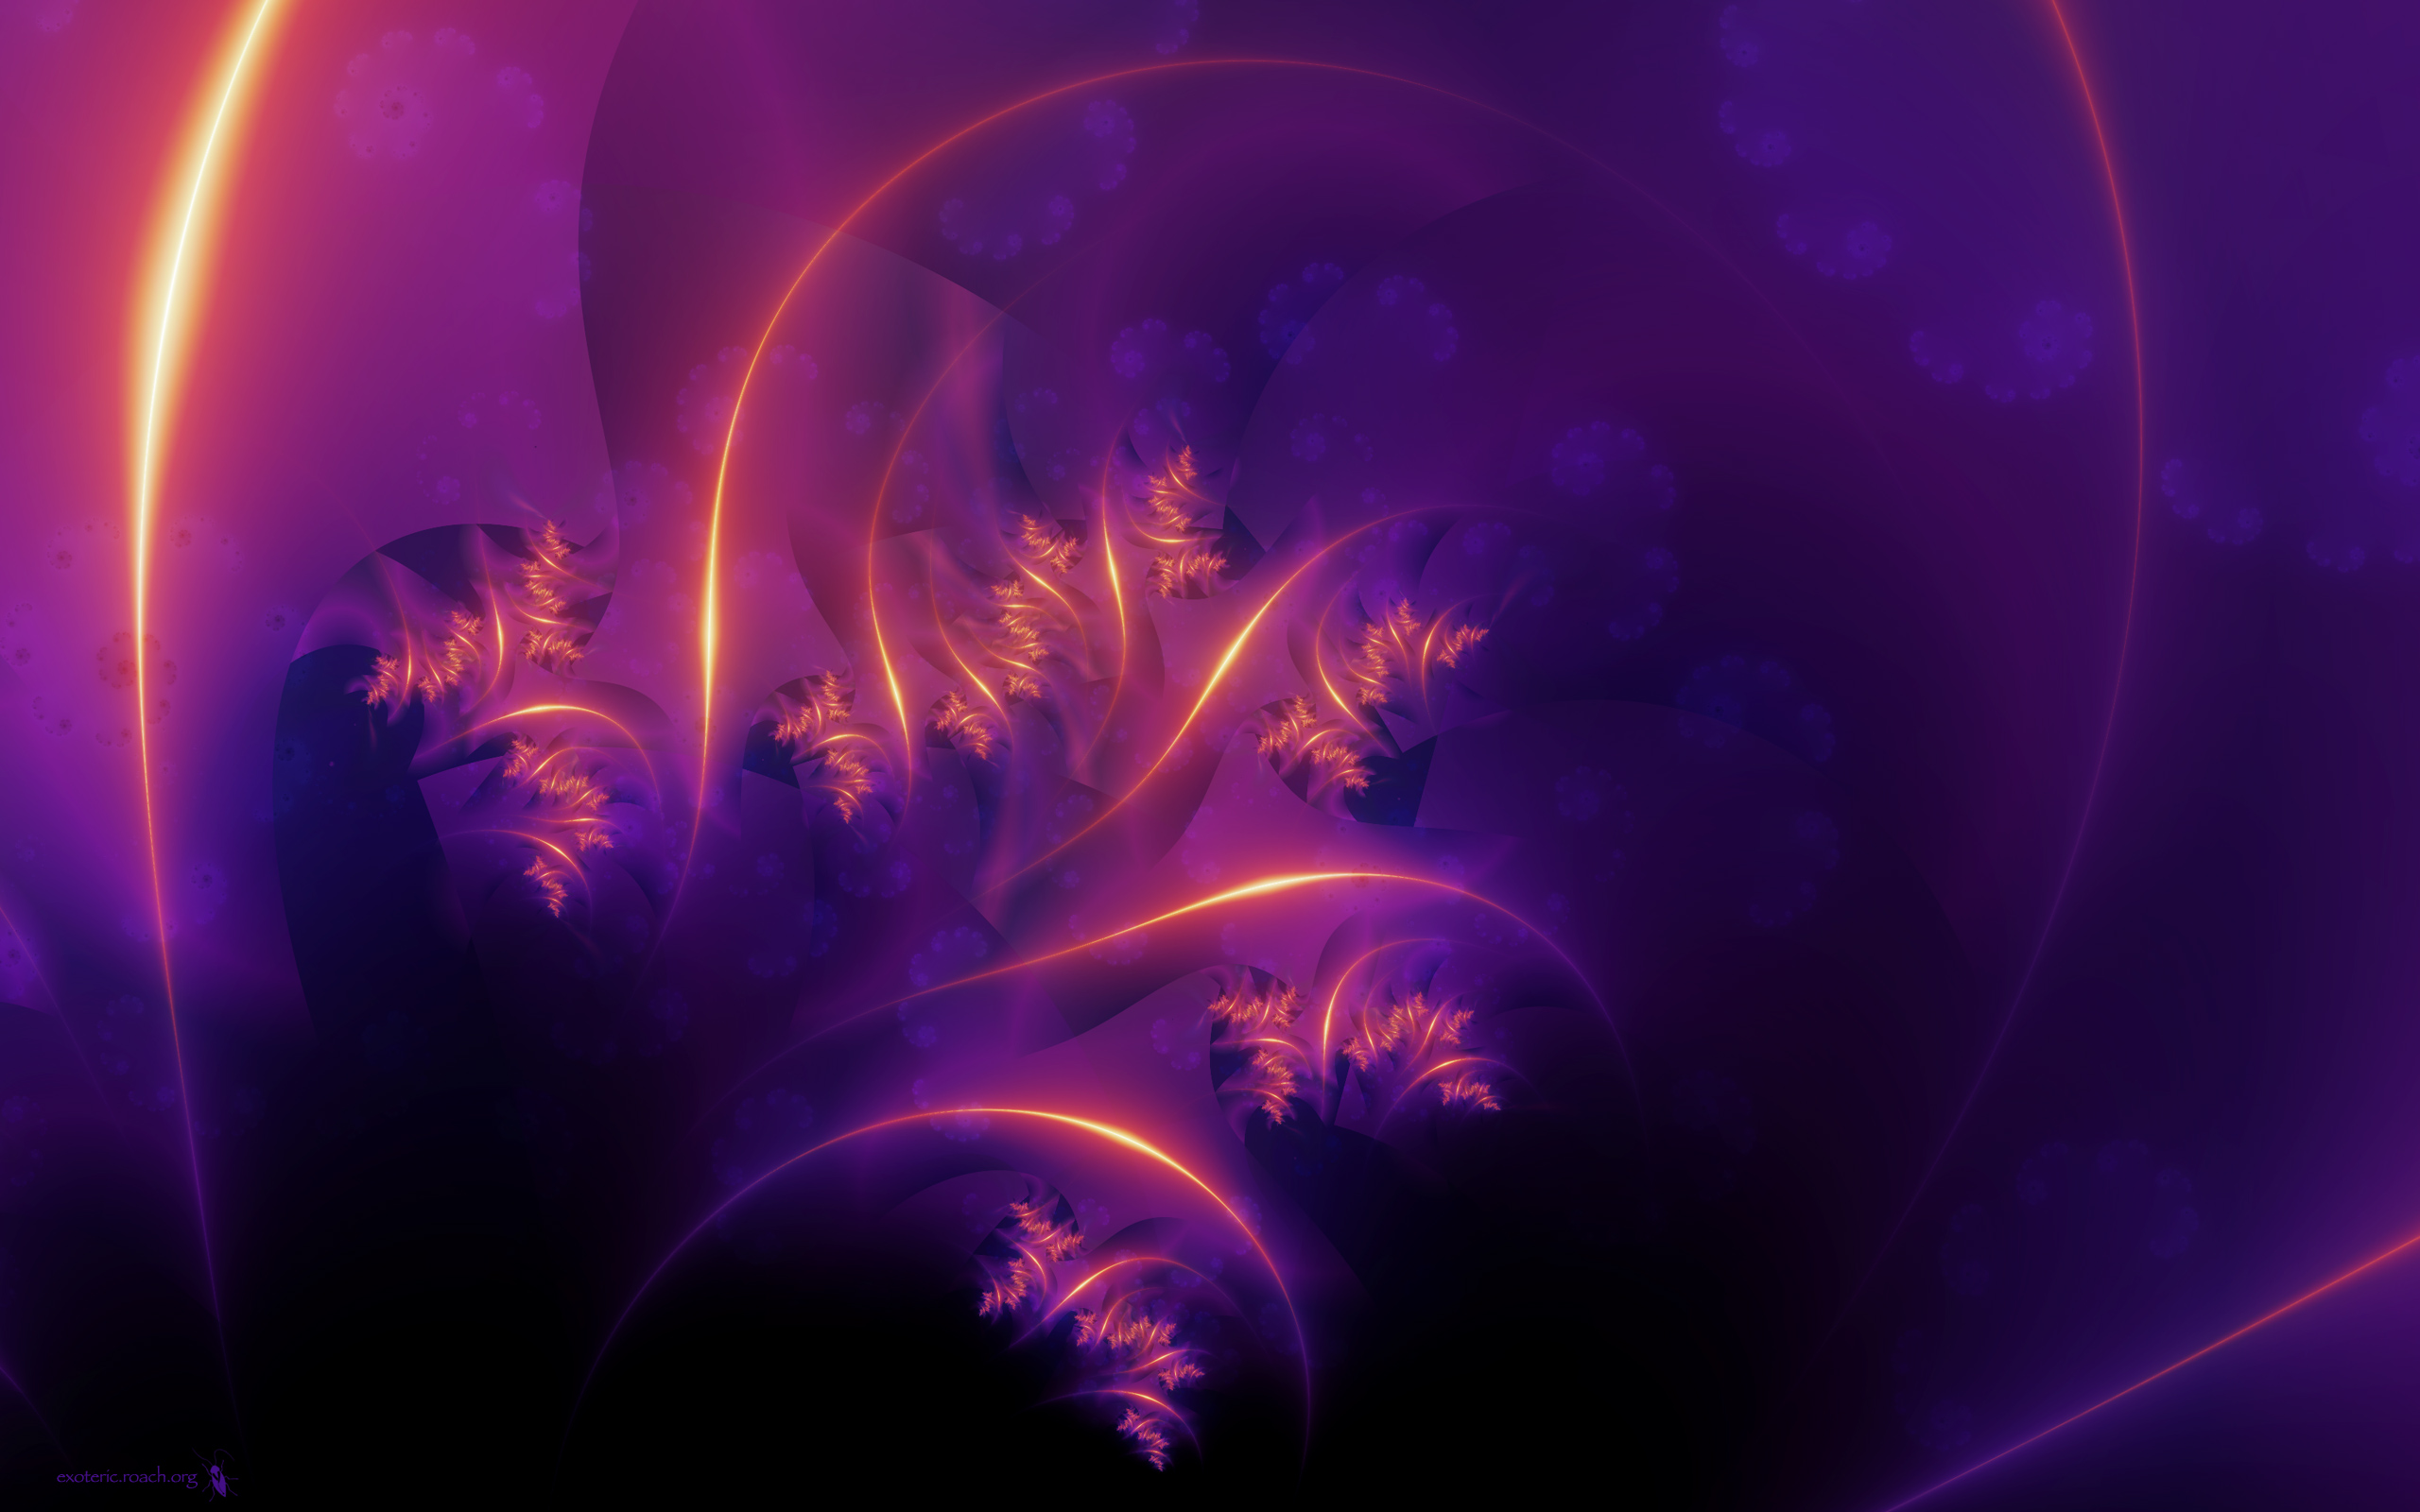 General 2560x1600 abstract fractal shapes digital art watermarked